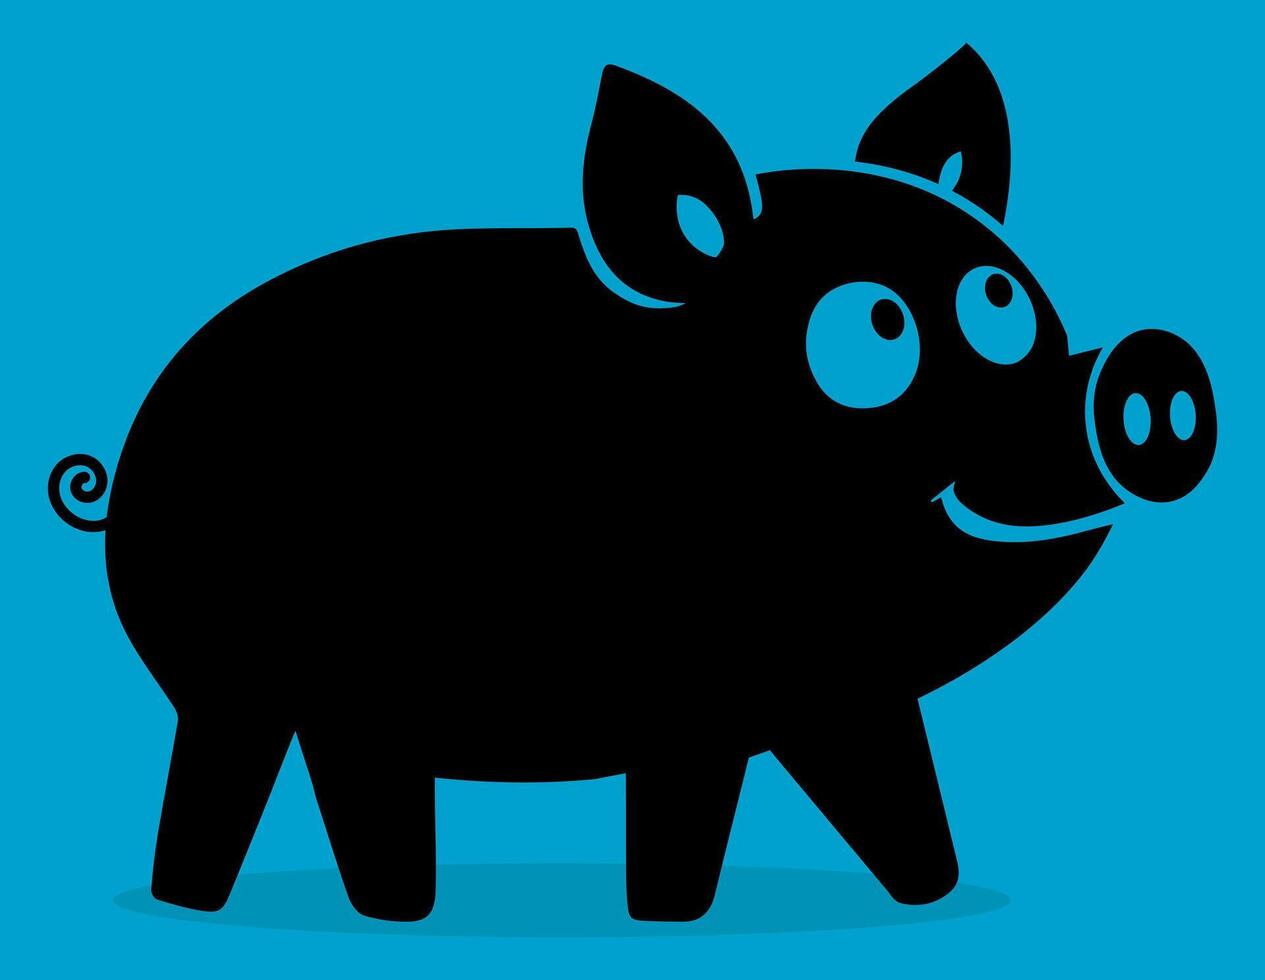 pig silhouette, cute little pig vector illustration for backgrounds logos